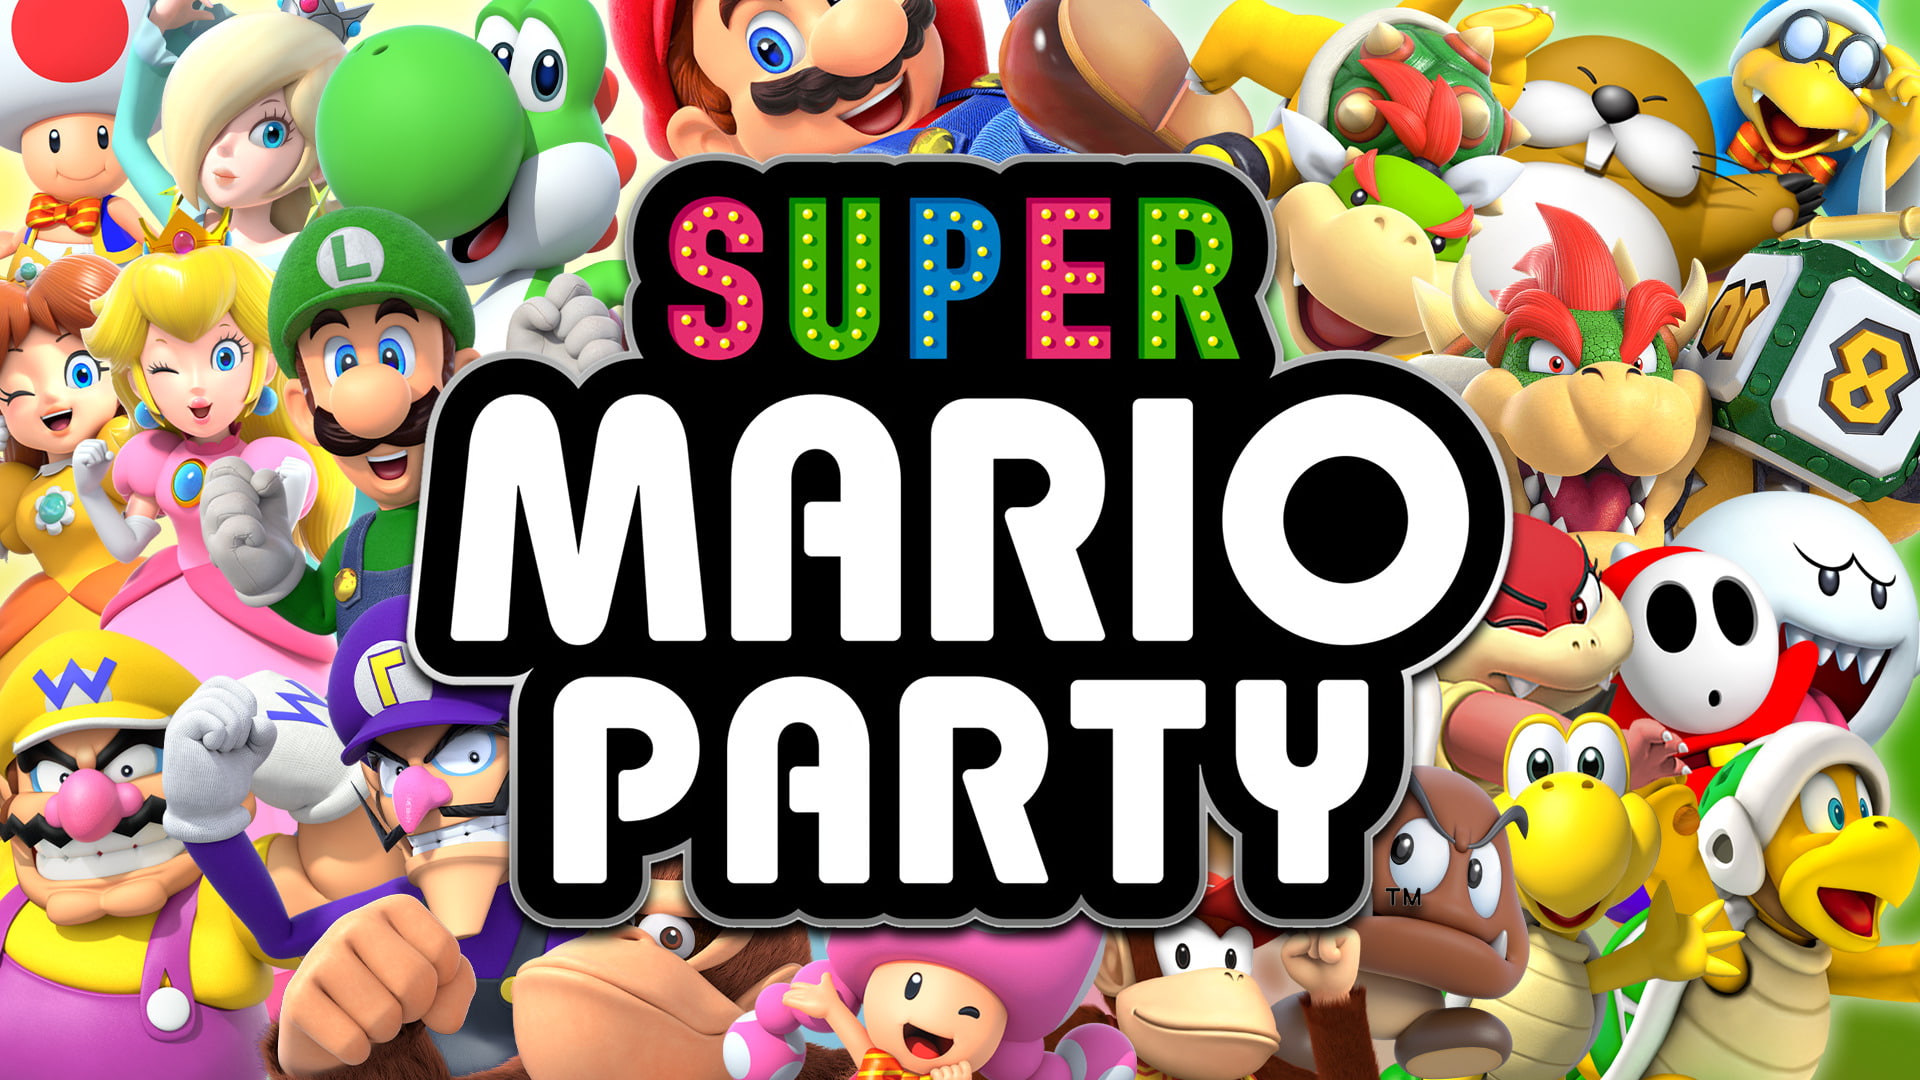 Video Game, Super Mario Party, Boo , Bowser, Bowser - Super Mario Party Background , HD Wallpaper & Backgrounds